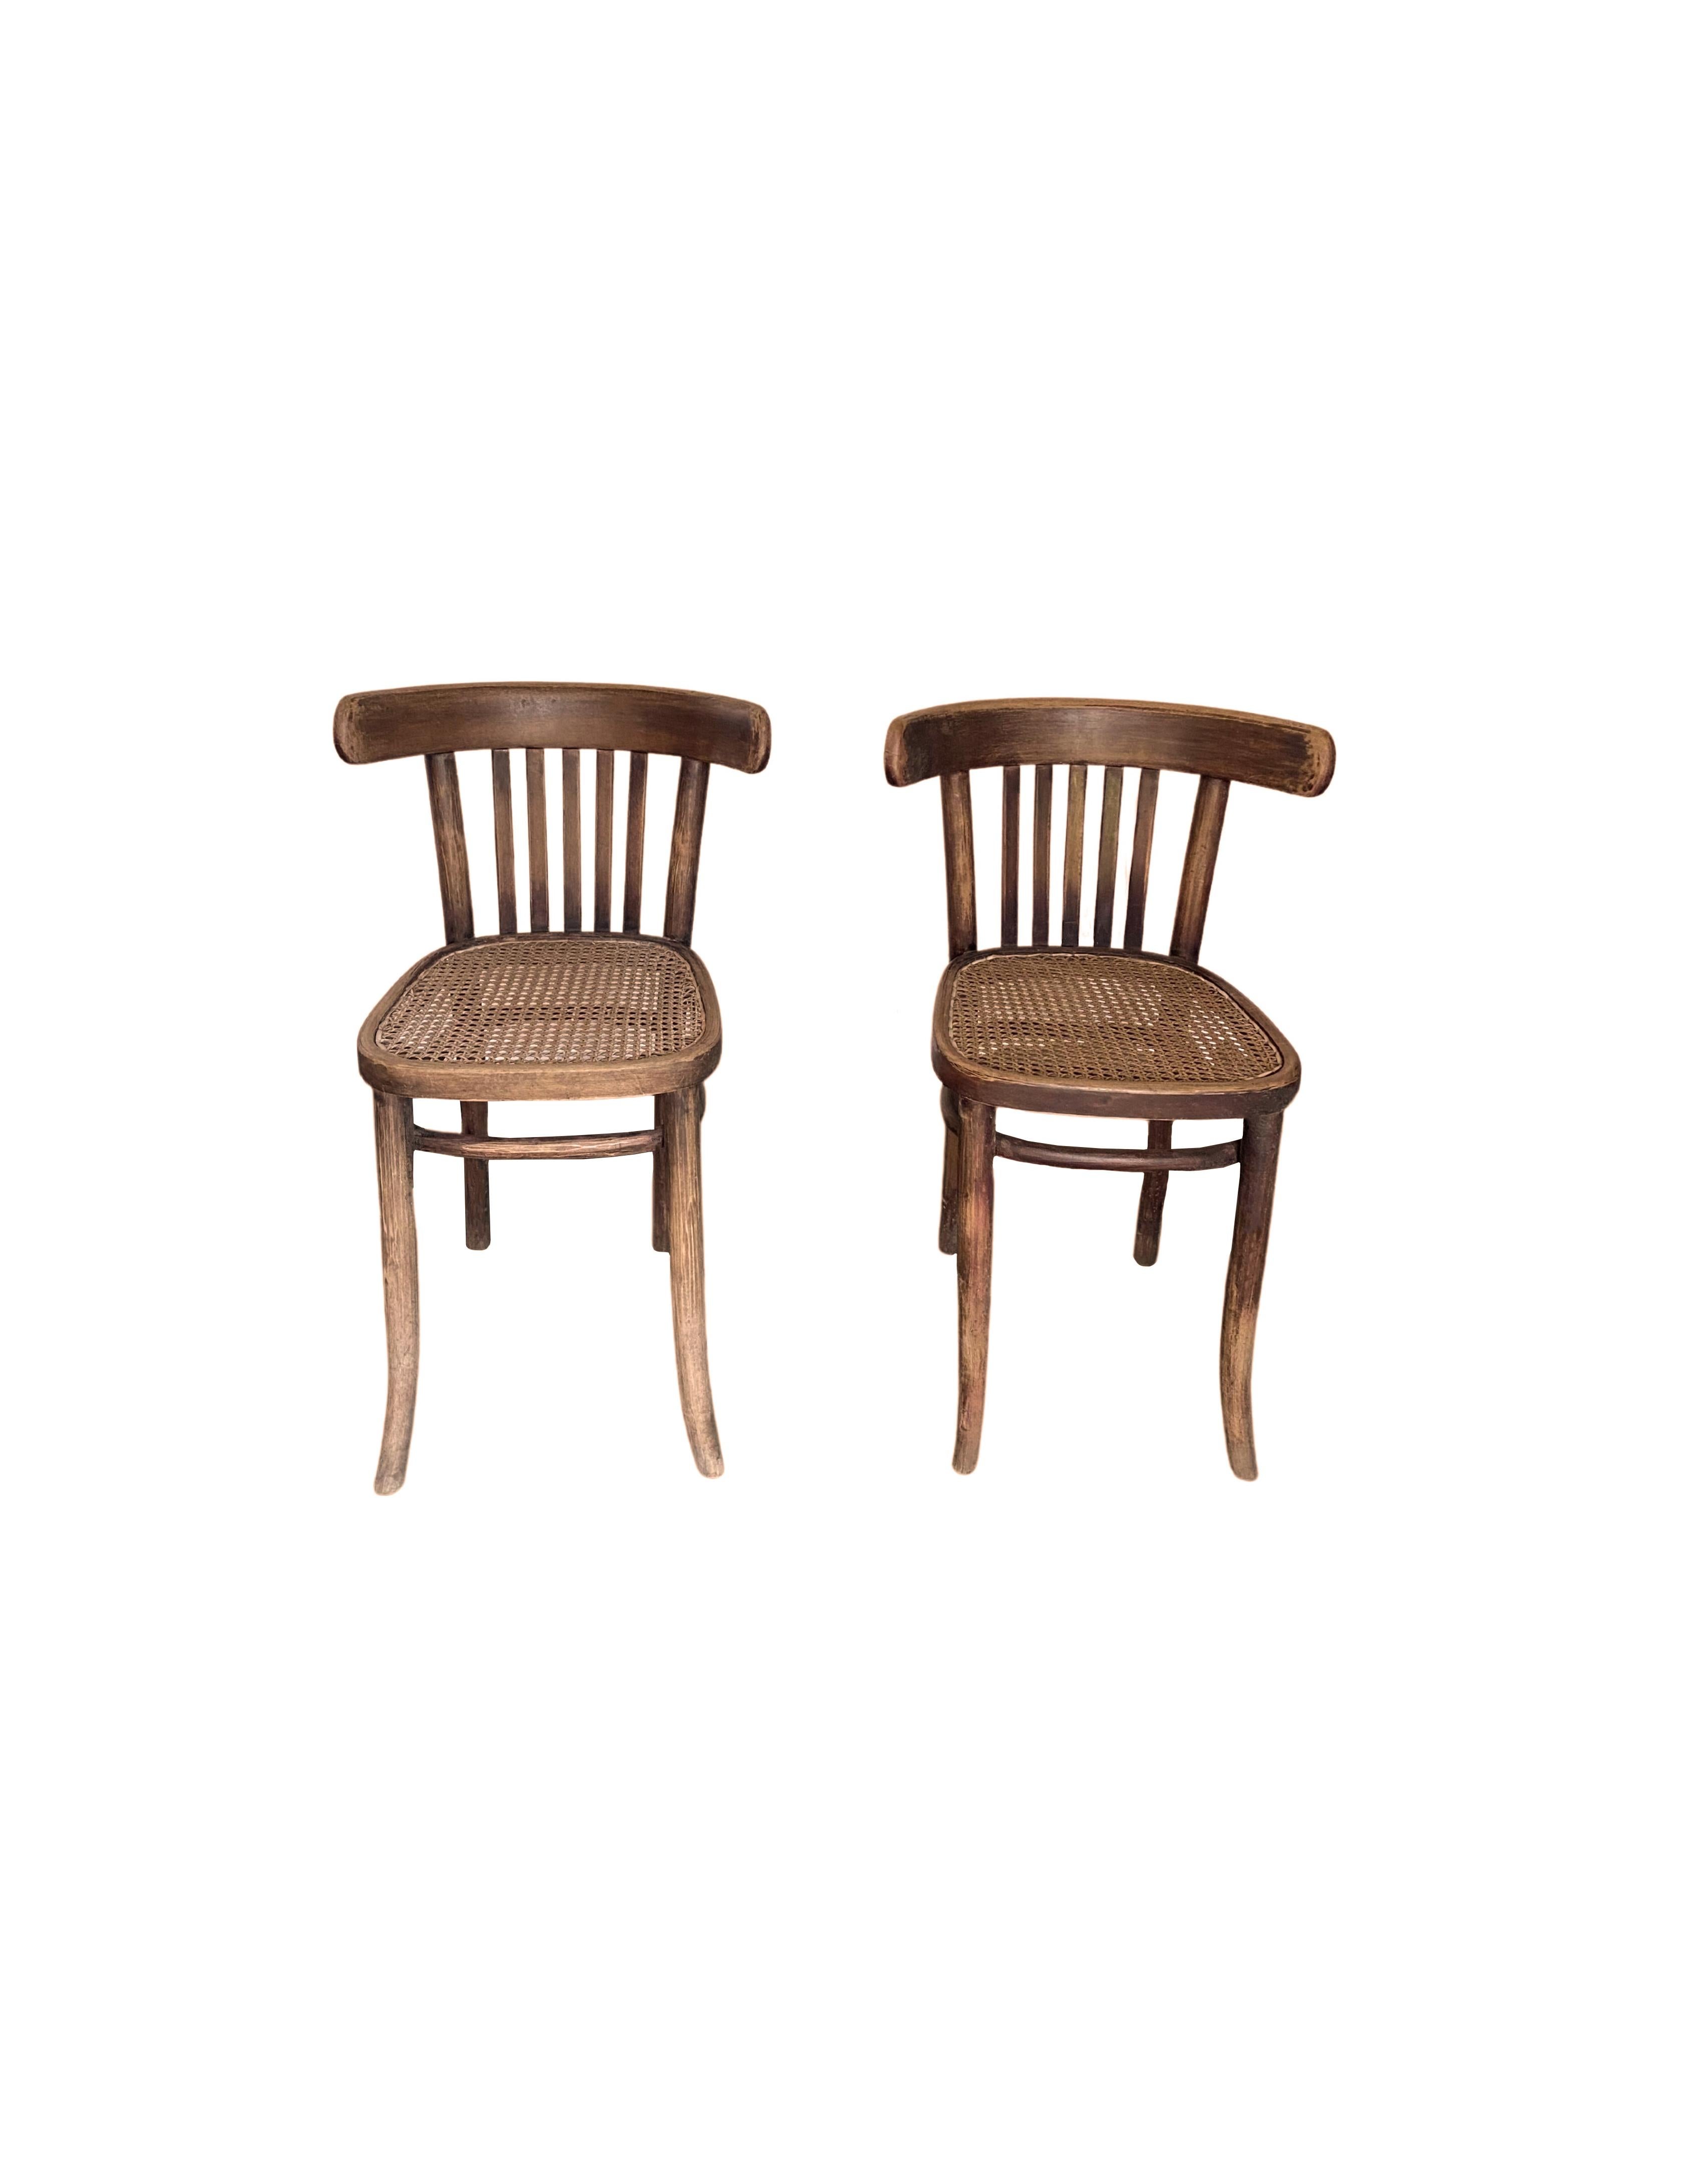 An elegant pair of early 20th Century Dutch colonial chairs with cane seats from Java, Indonesia. Their curved legs, and age related patina of the wood adds to their charm. 

 